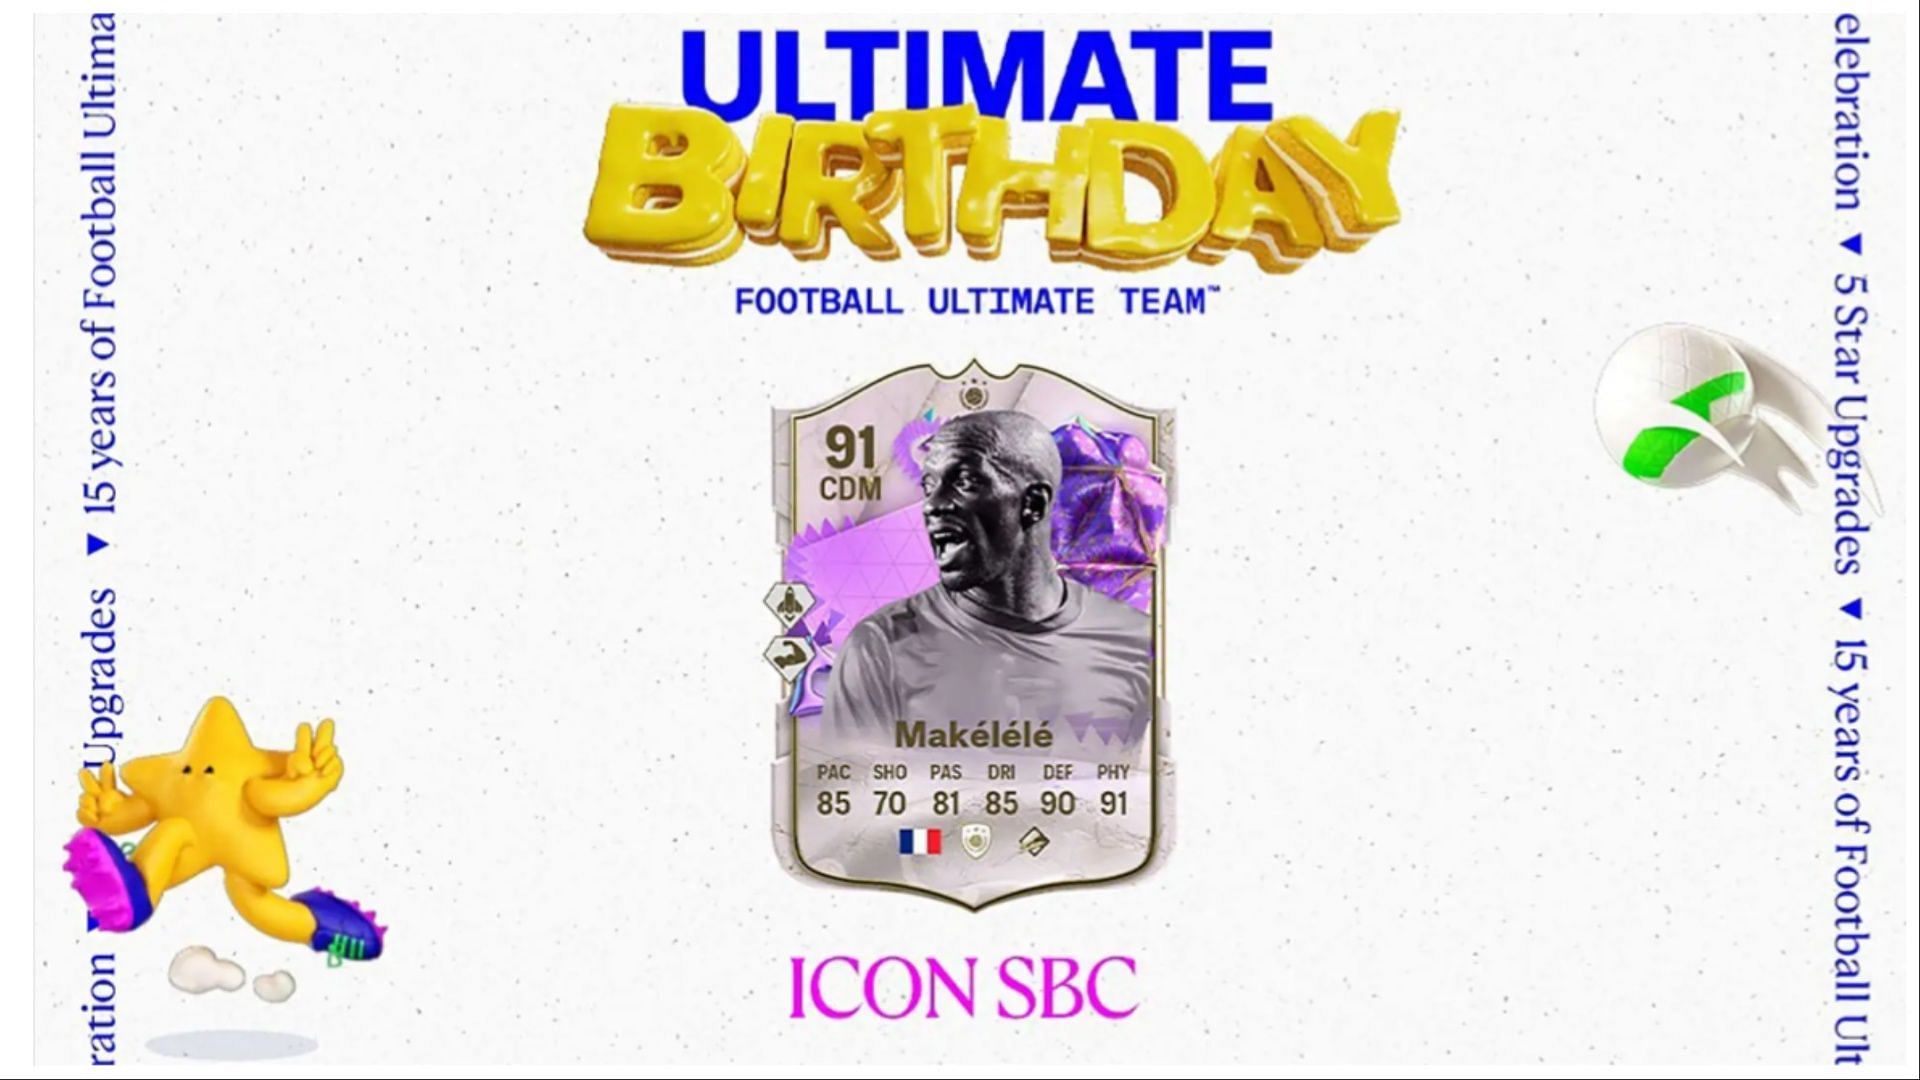 The EA FC 24 Claude Makelele Ultimate Birthday Icon SBC has arrived